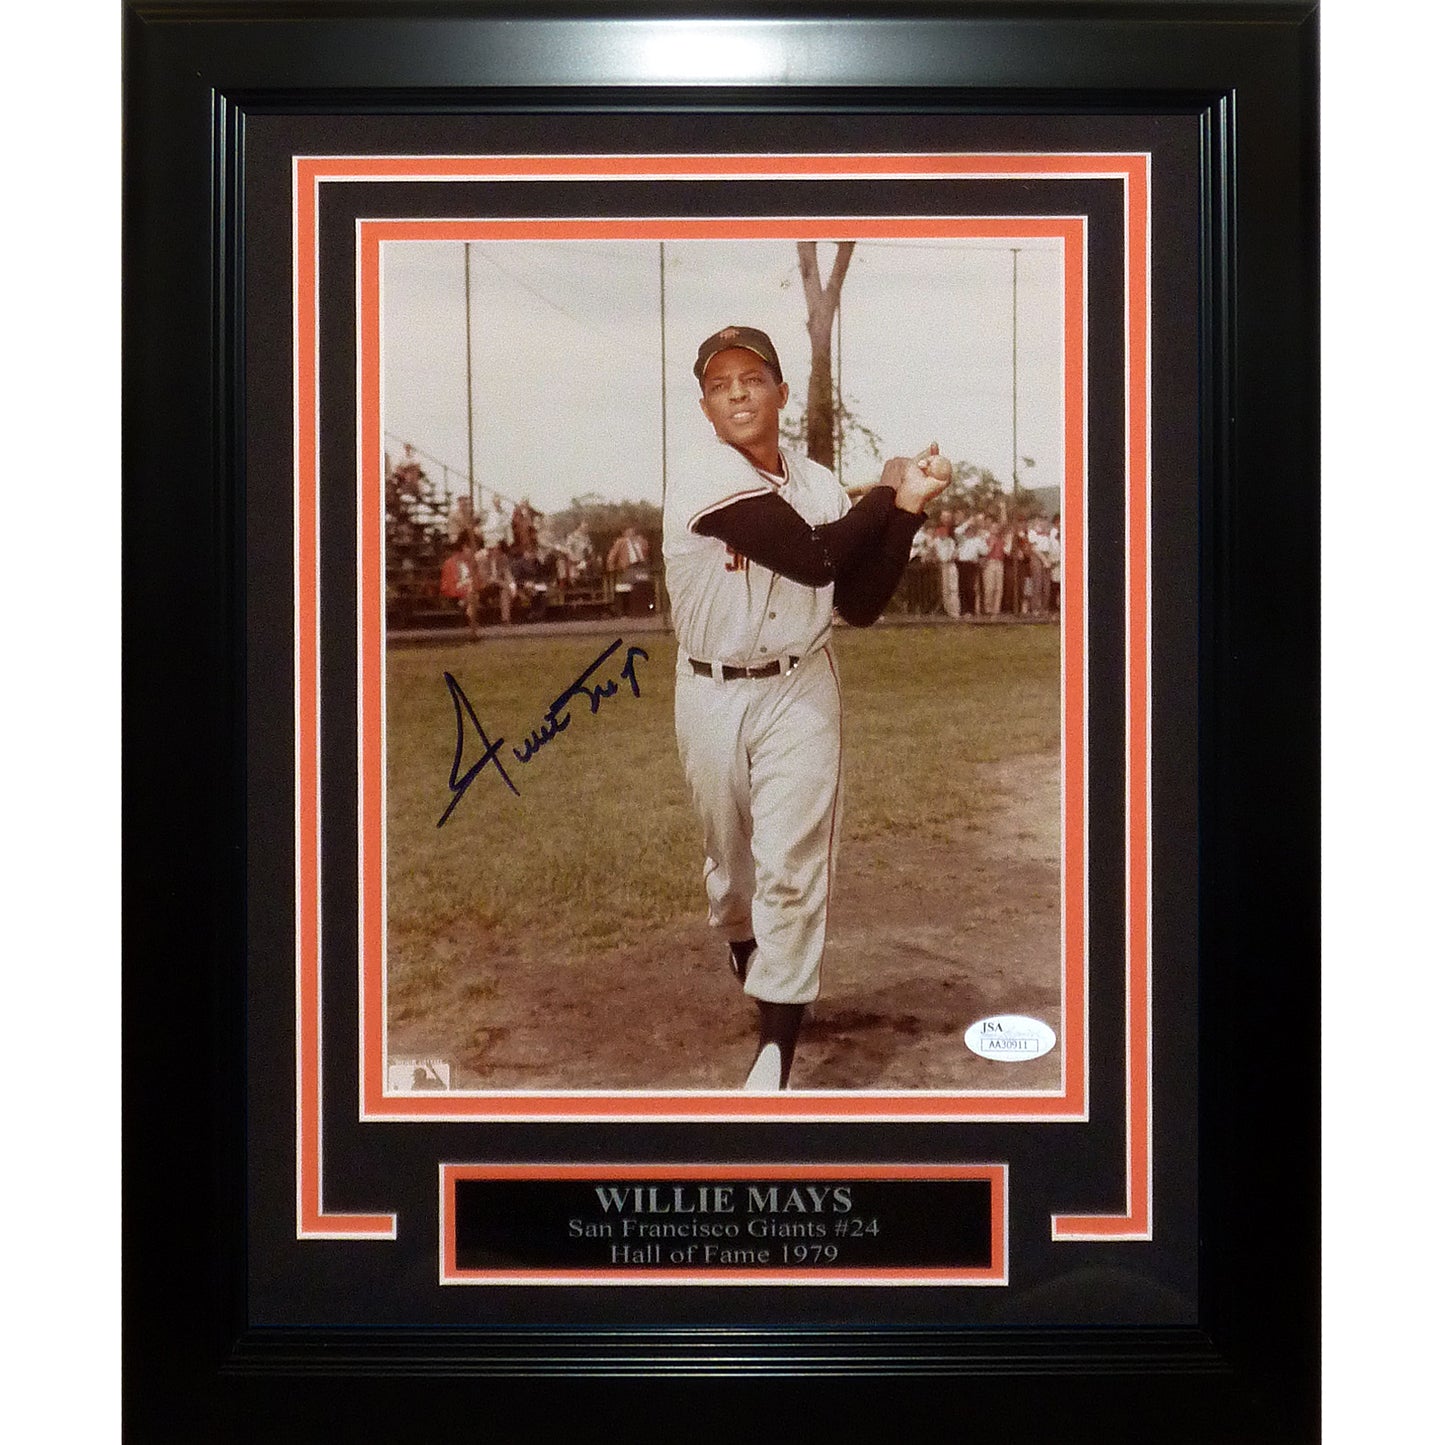 Willie Mays Autographed San Francisco Giants Deluxe Framed 8x10 Photo - JSA